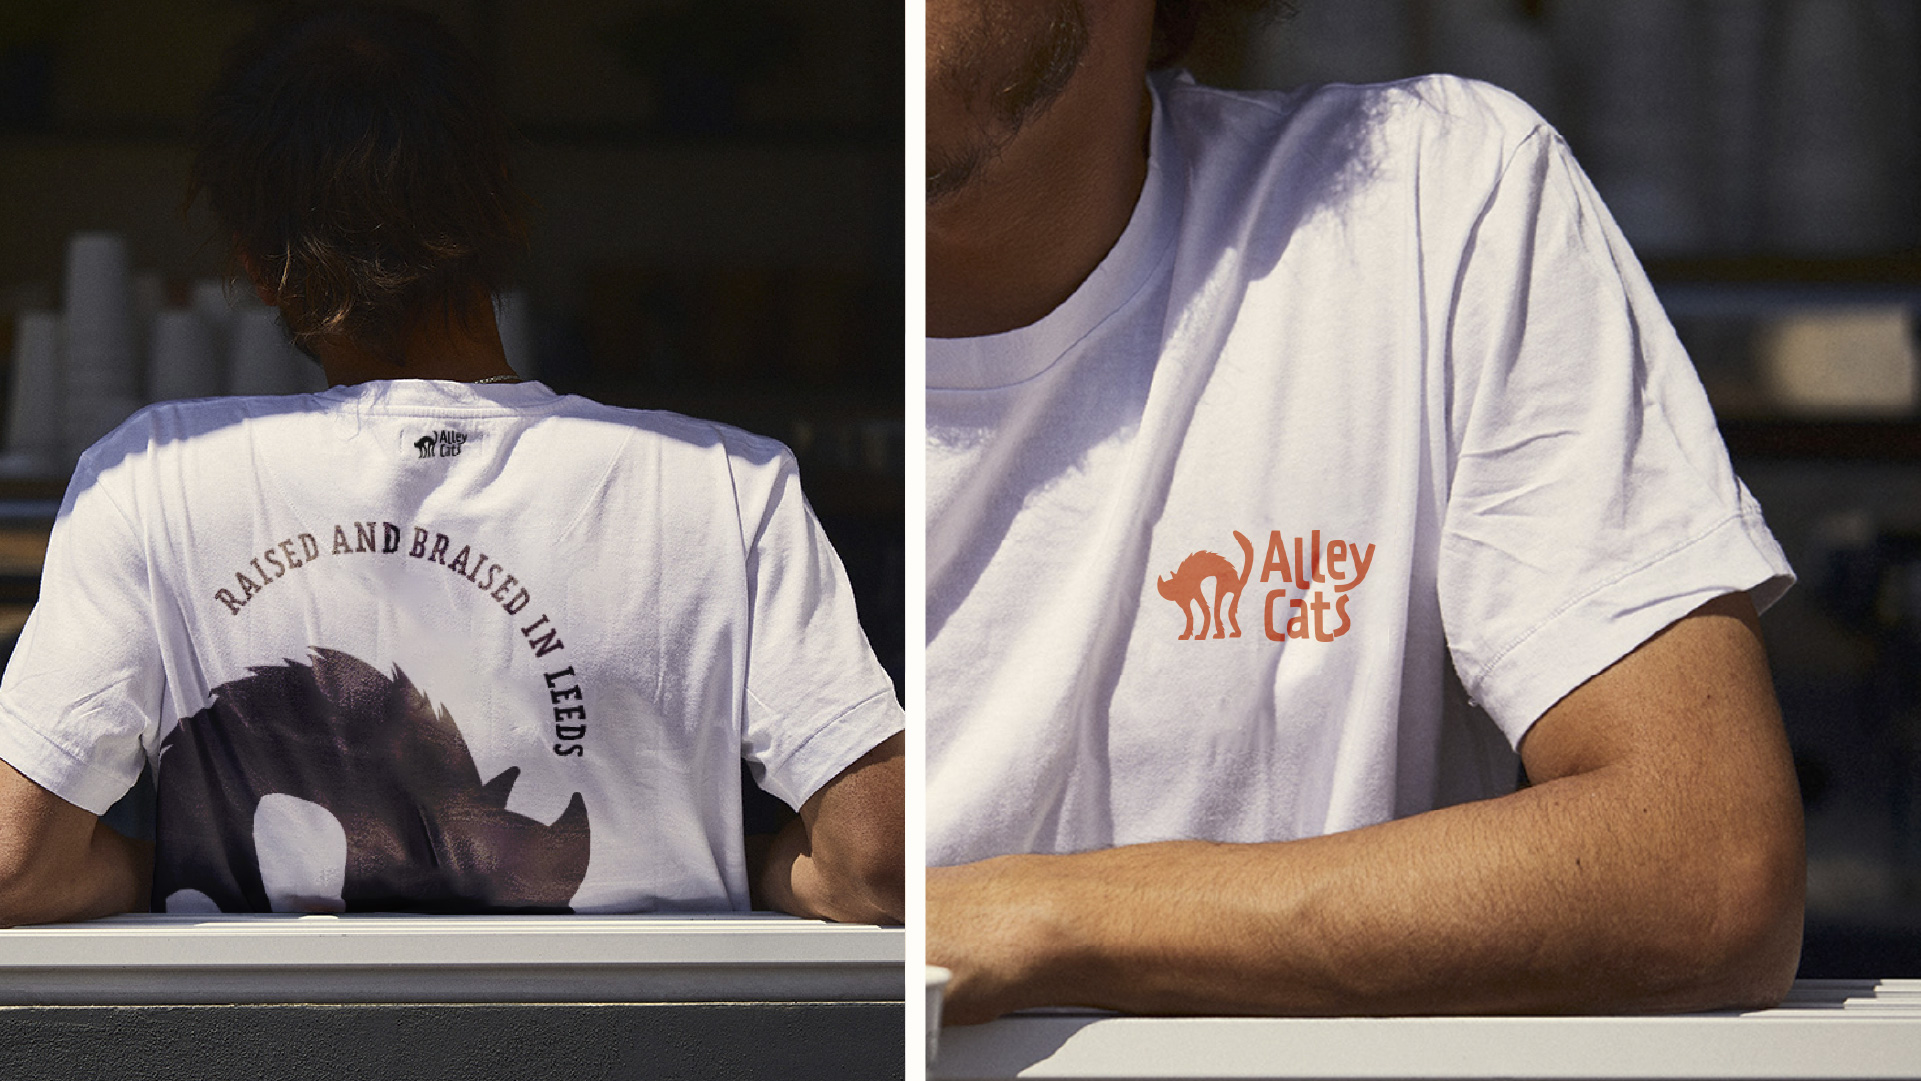 Barista;s leaning with the logo of alley cats printed on both back and front of their white t-shirts